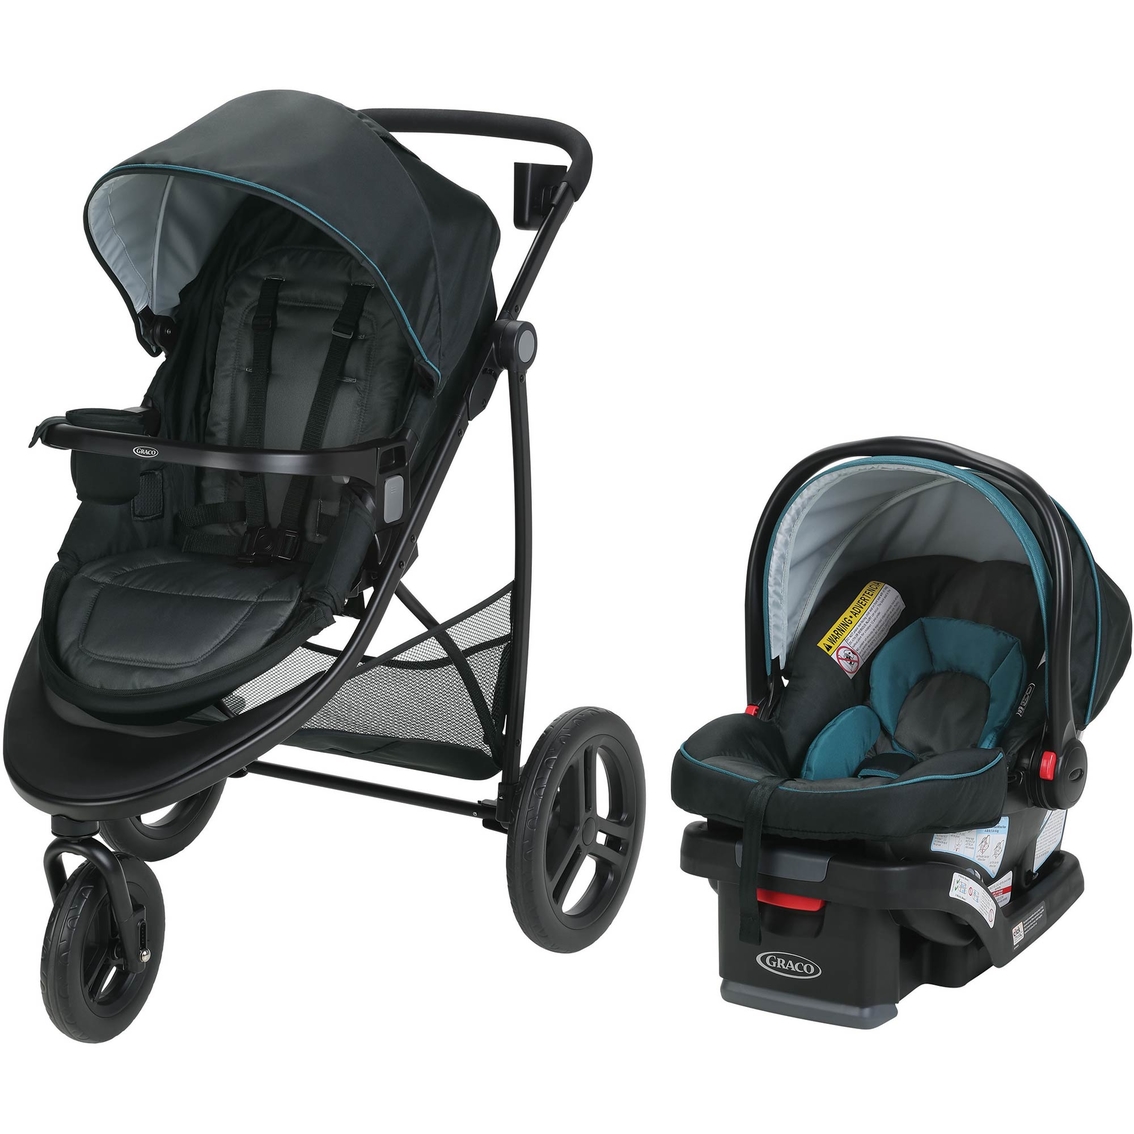 modes2grow travel system by graco